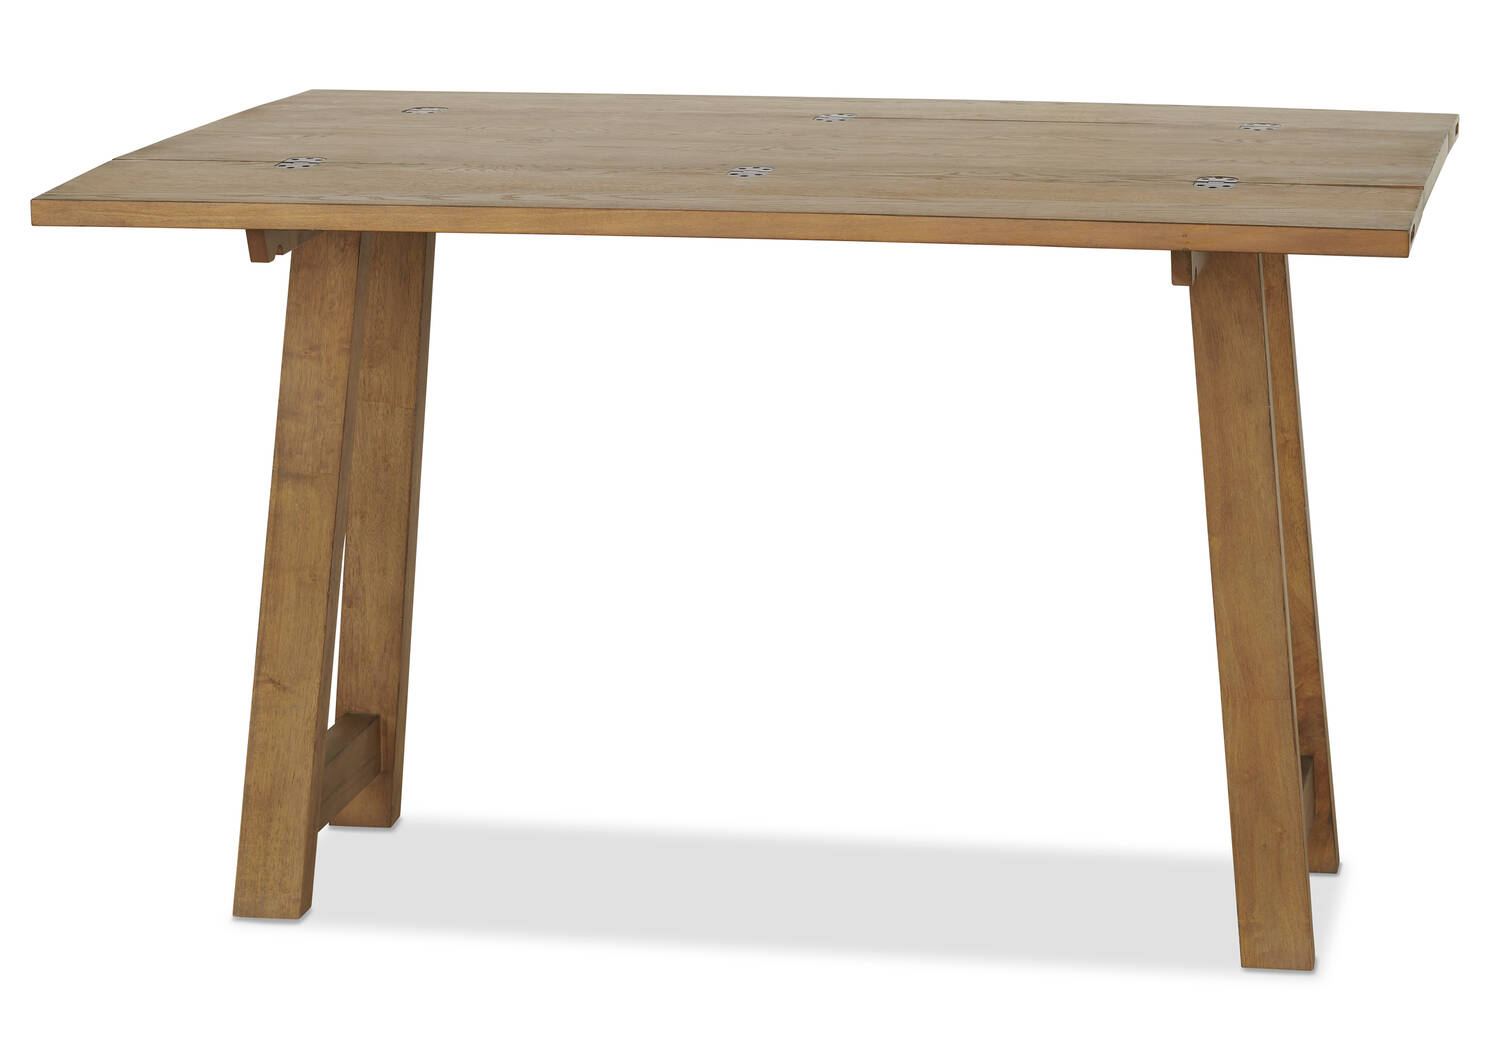 Broderick Console Table -Wensley Barley